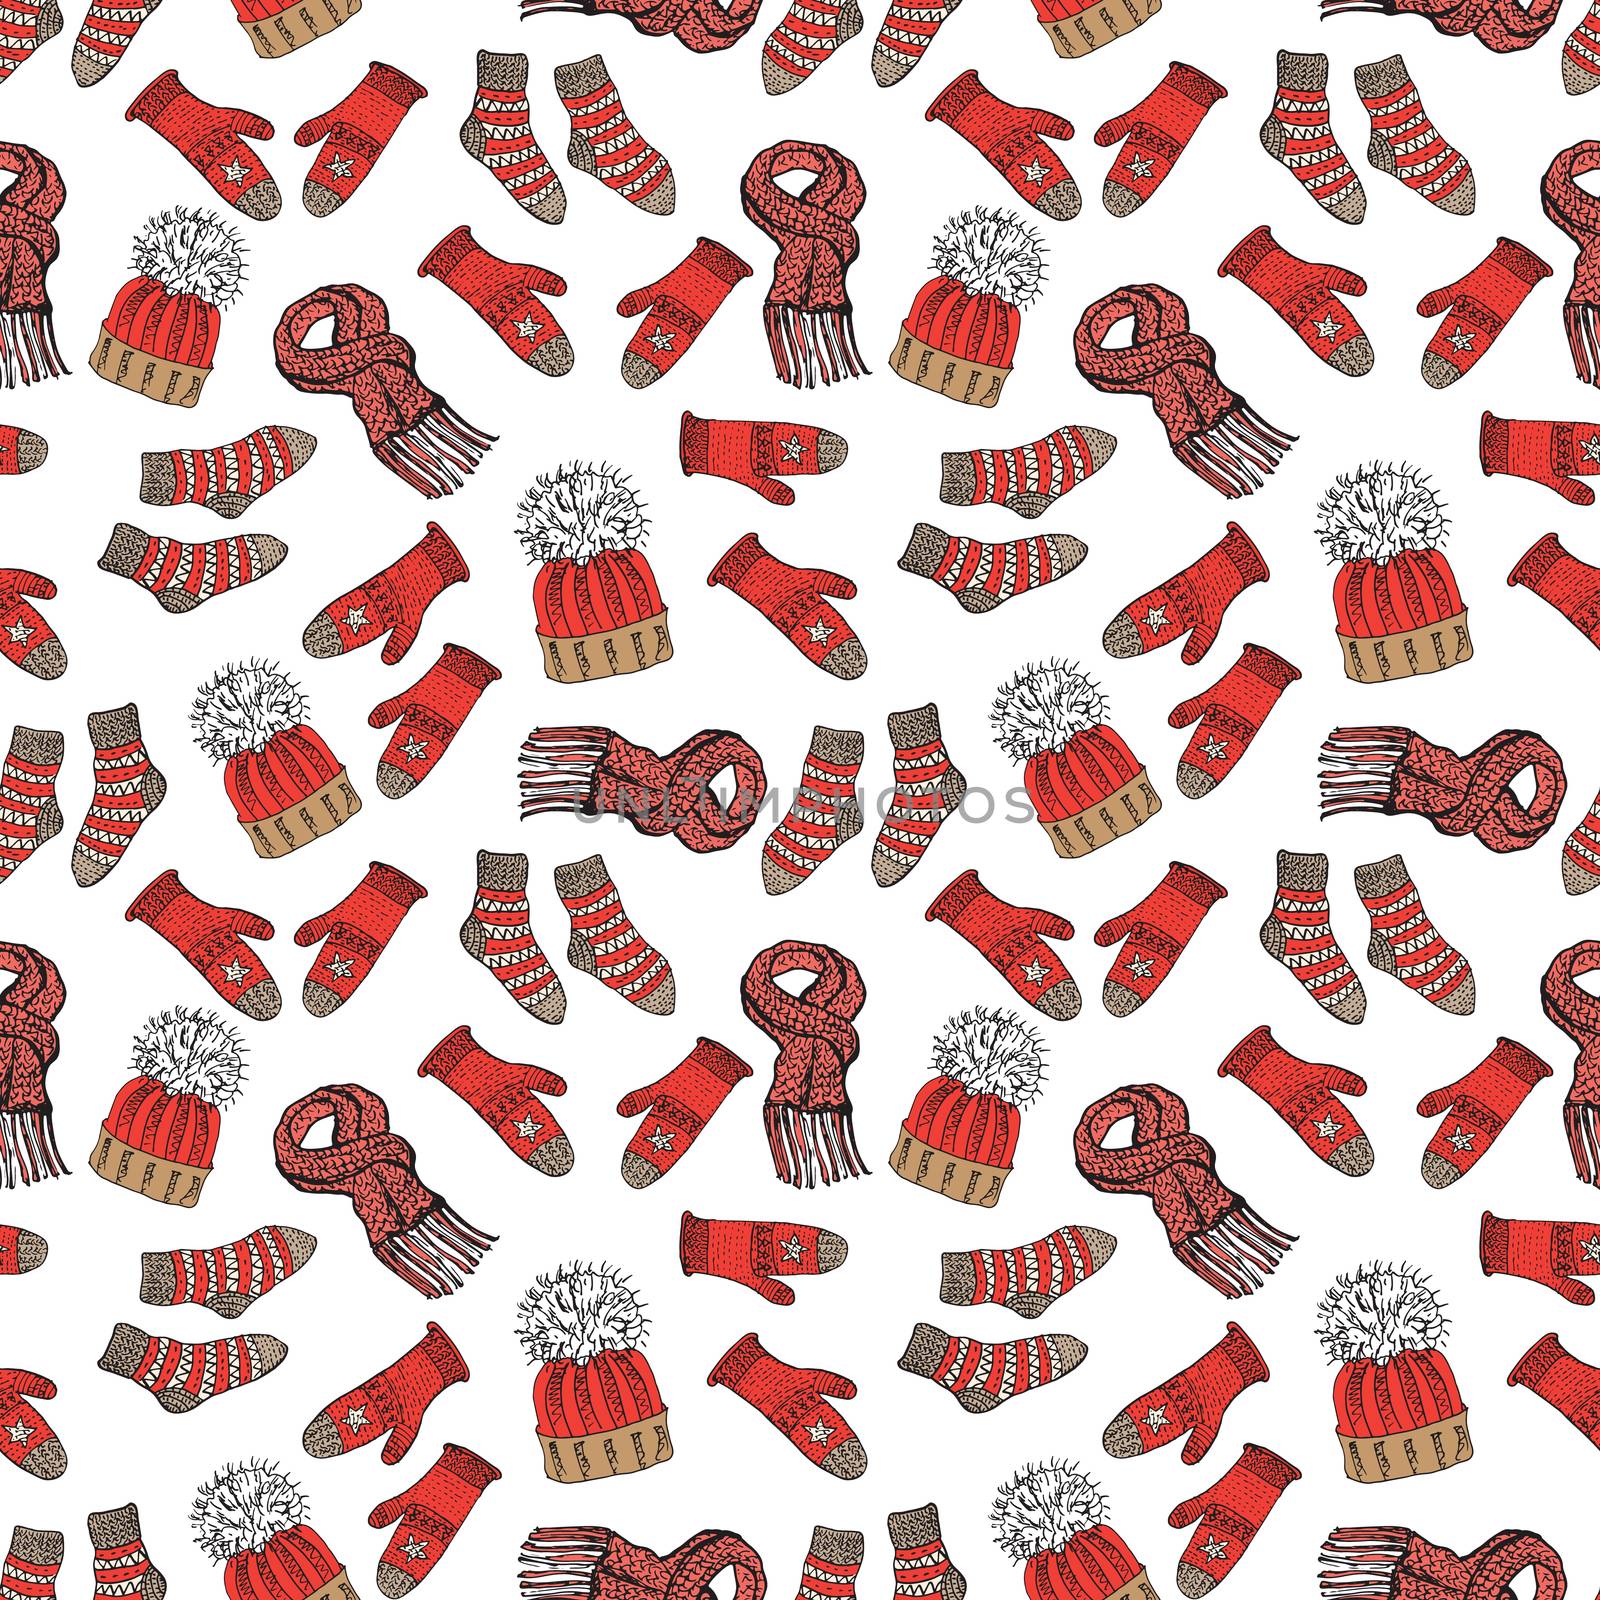 Winter season doodle clothes seamless pattern. Hand drawn sketch elements warm raindeer sweater socks, gloves and hats. vector background illustration